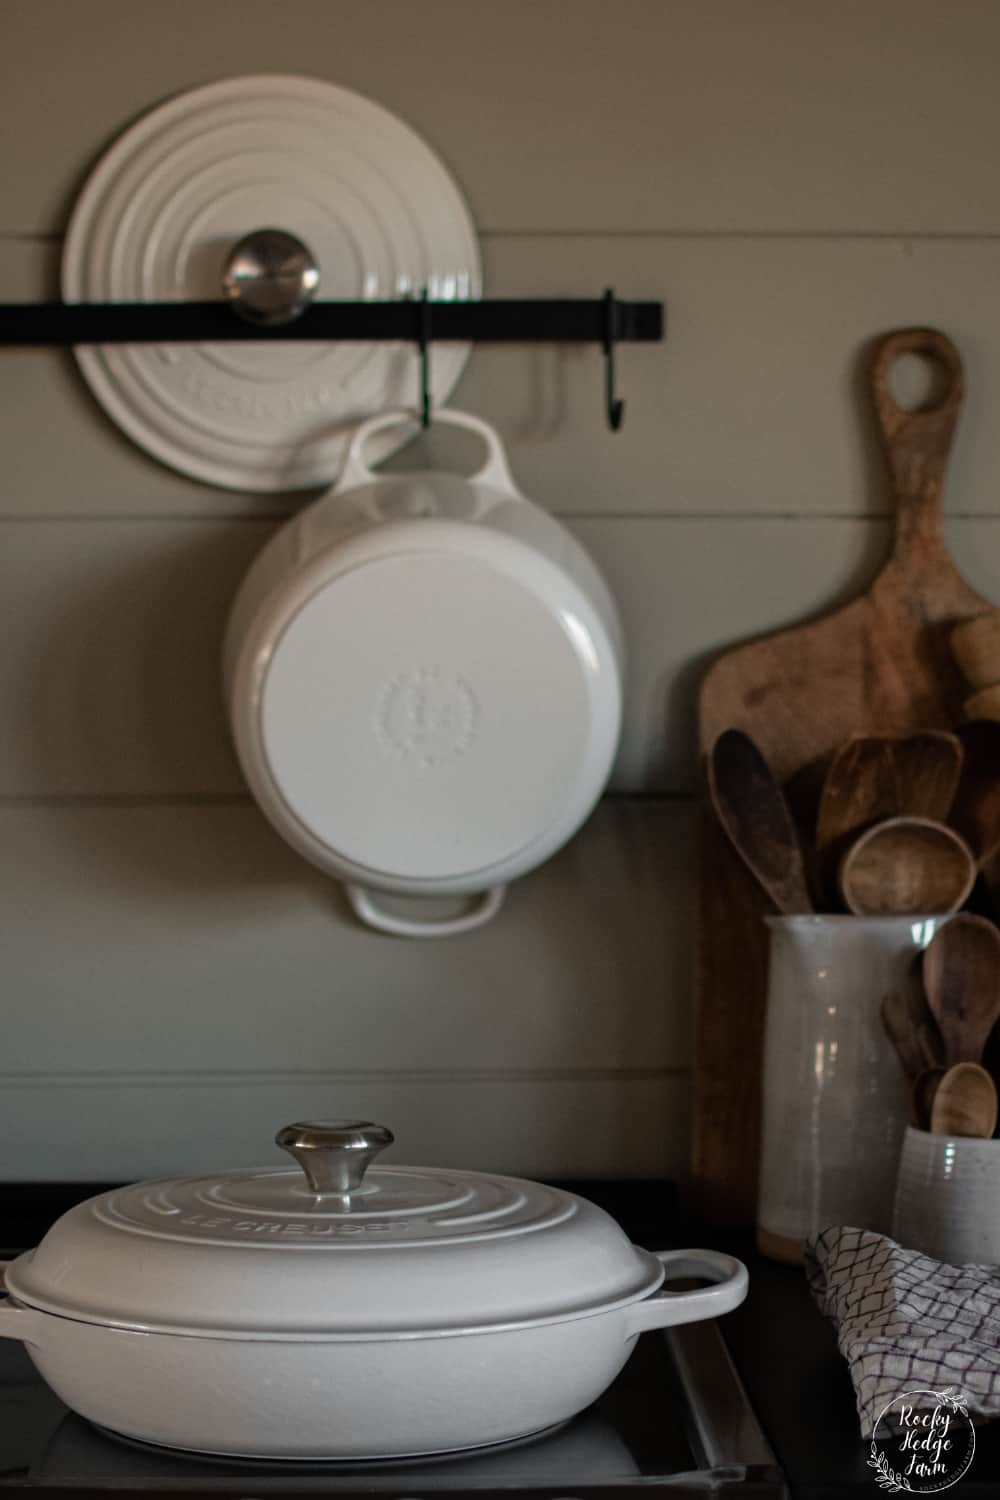 Regular vs. enameled cast iron: How they compare for cooking and cleaning -  The Washington Post